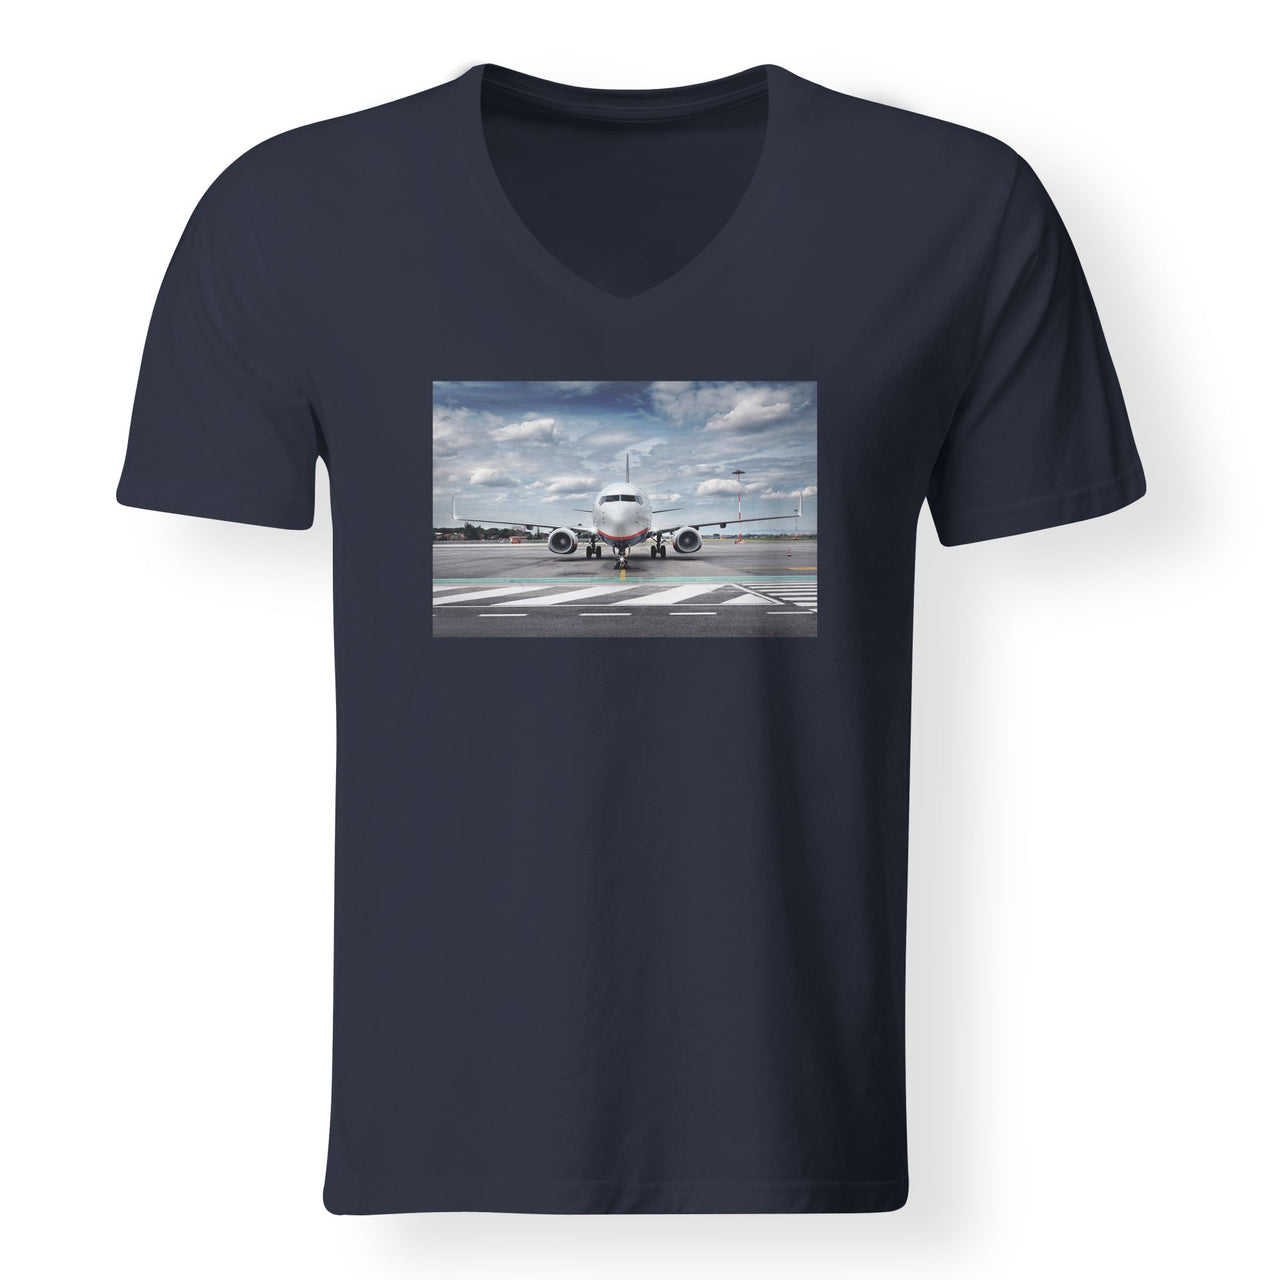 Amazing Clouds and Boeing 737 NG Designed V-Neck T-Shirts